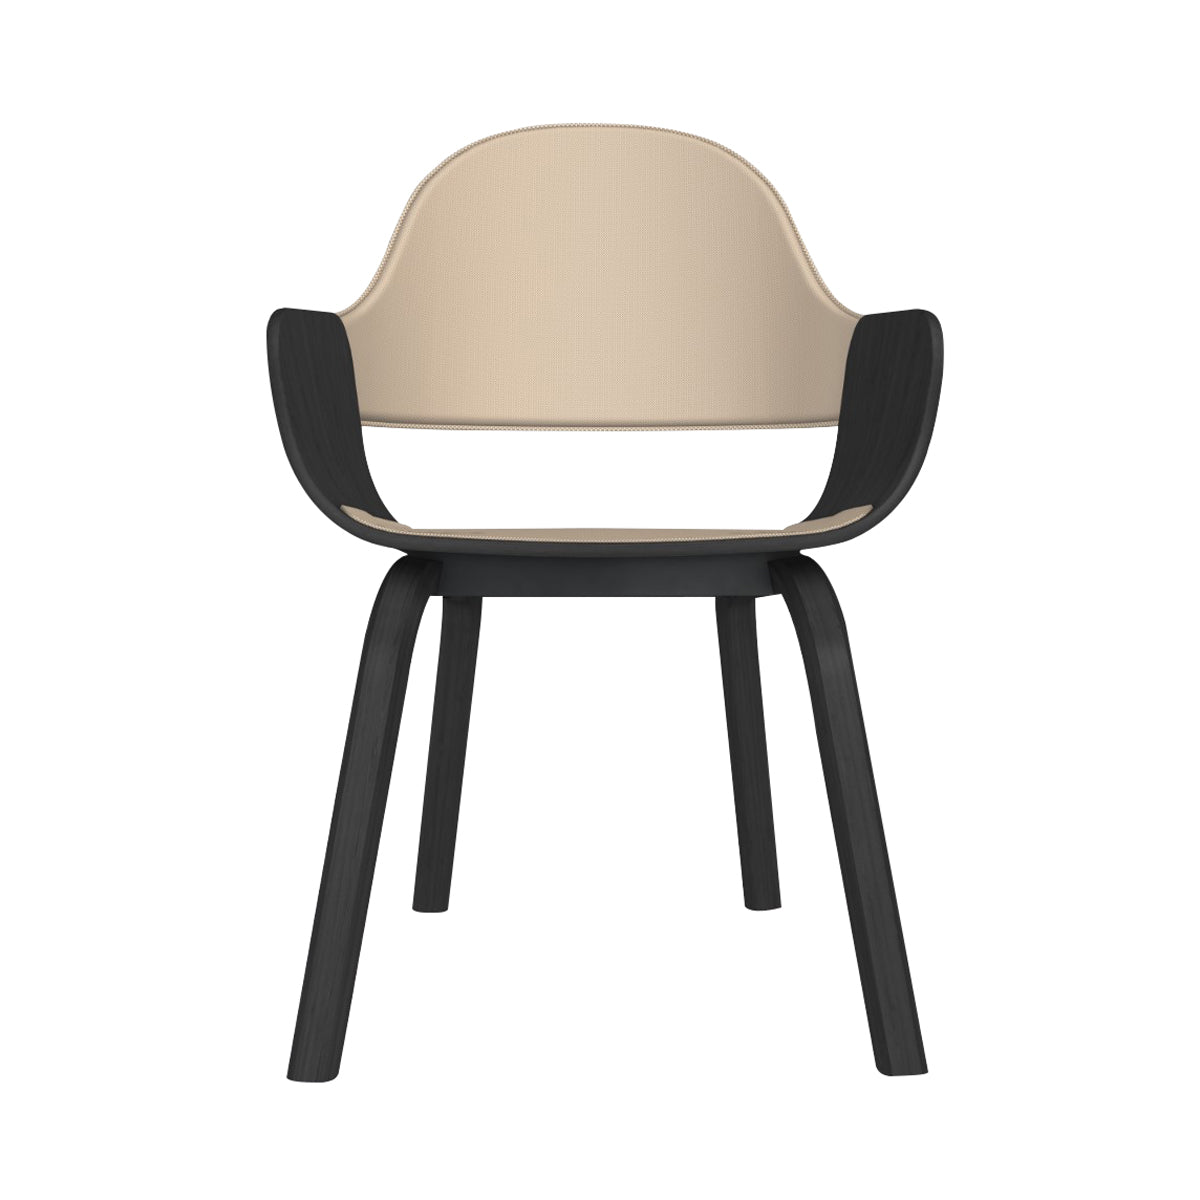 Showtime Nude Chair: Seat + Backrest Upholstered + Ash Stained Black + Ash Stained Black